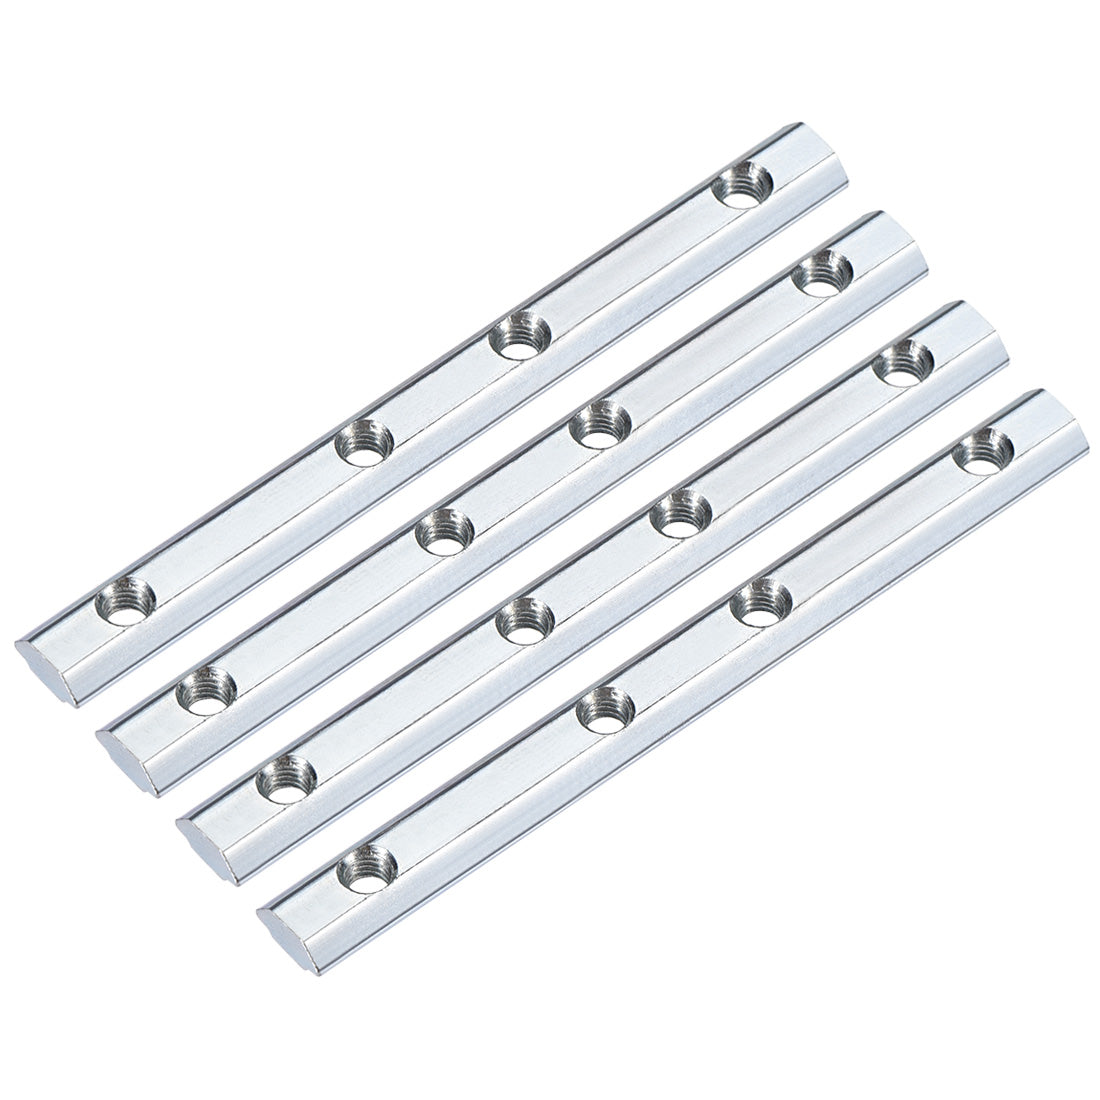 uxcell Uxcell Straight Line Connector, 3.9 Inch Joint Bracket for 2020 Series T Slot 6mm Aluminum Extrusion Profile, 4 Pcs